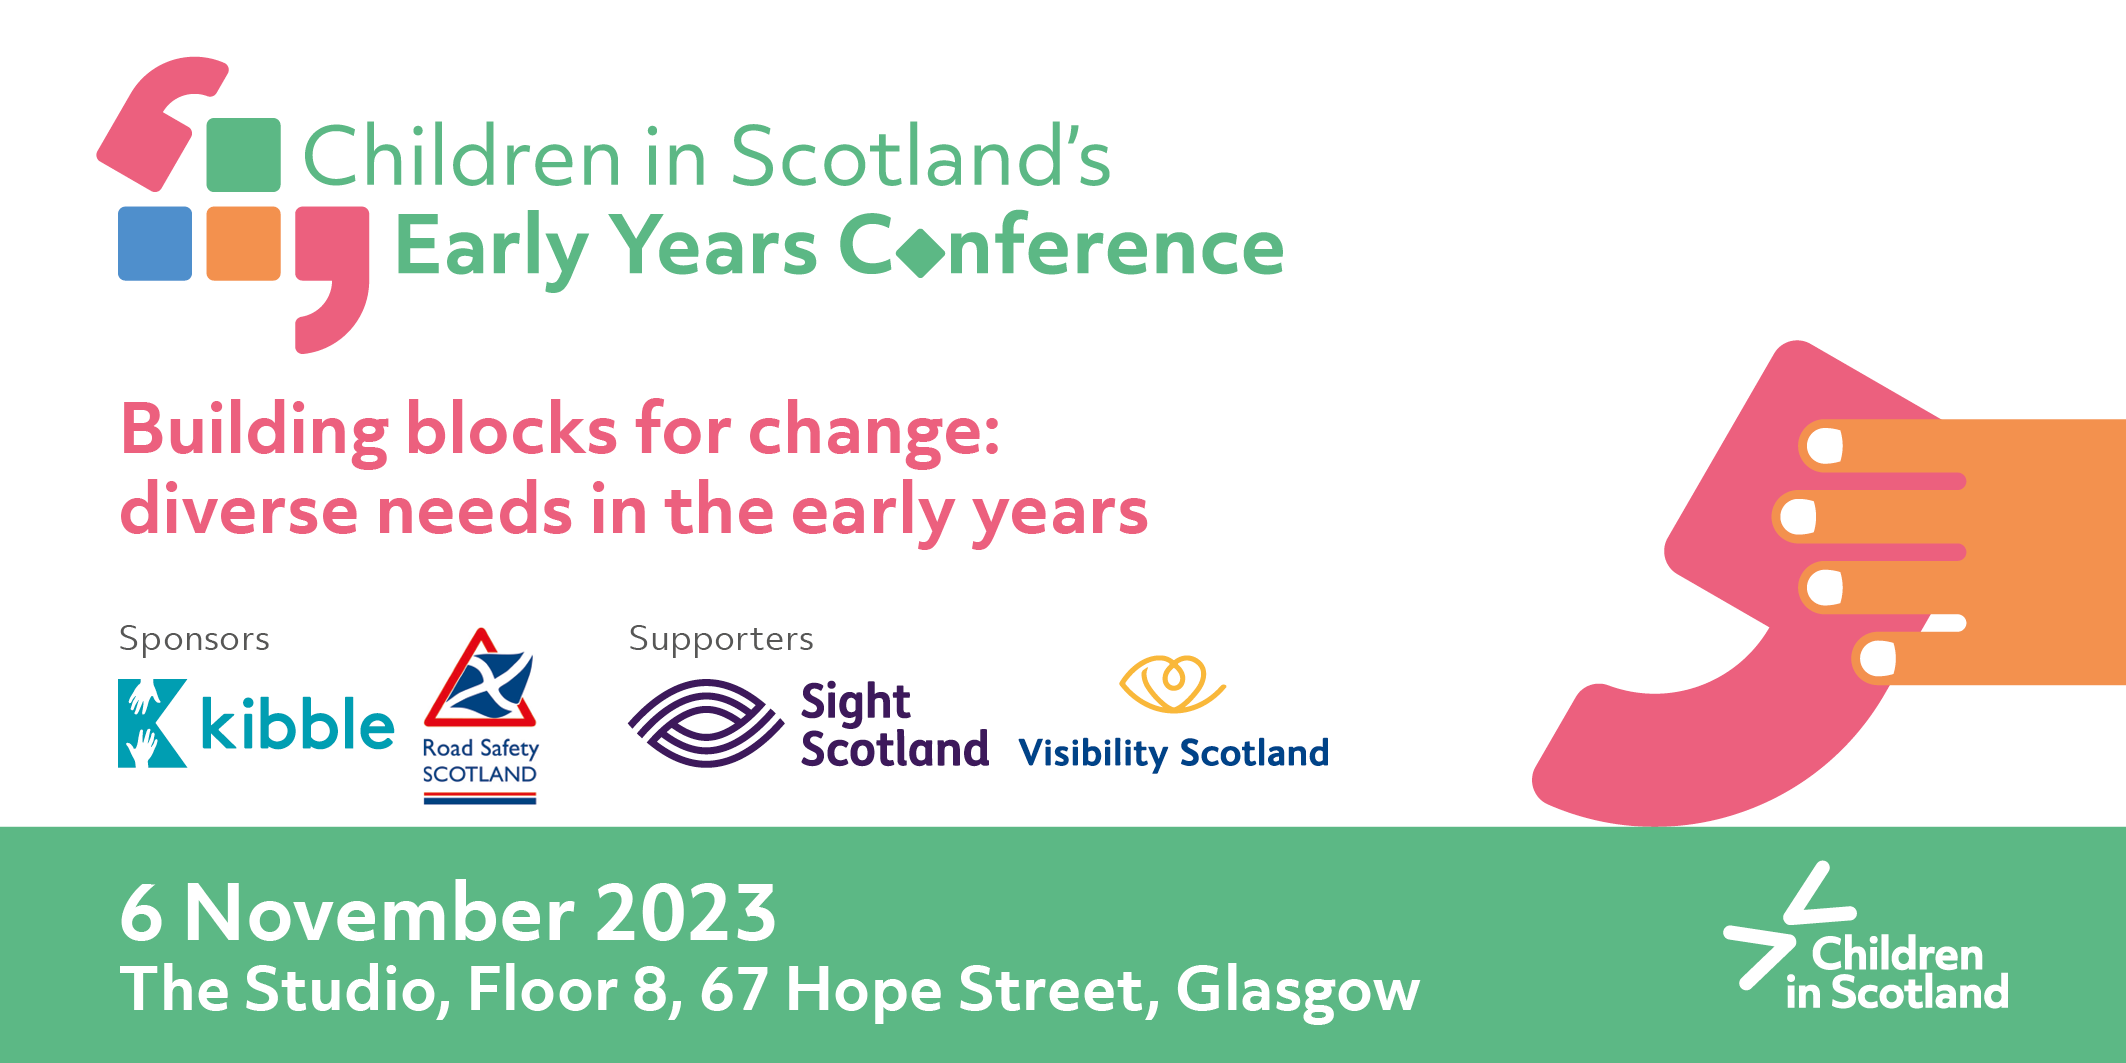 Green and pink text on a green/white background. Text says Children in Scotland's Early Years Conference Building Blocks for change: diverse needs in the early years. Under it white text on green says Book now! 6 November, Glasgow. The text has cartoon style images on either side, of colourful blocks and large speech marks. On the right 6 Nov is written on more colourful blocks with an orange hand reachign for the block with 6 on it. Across the middle text logos say Sponsorts Kibble Road Safety Scotland Supporters Sight Scotland and Visibility Scotland